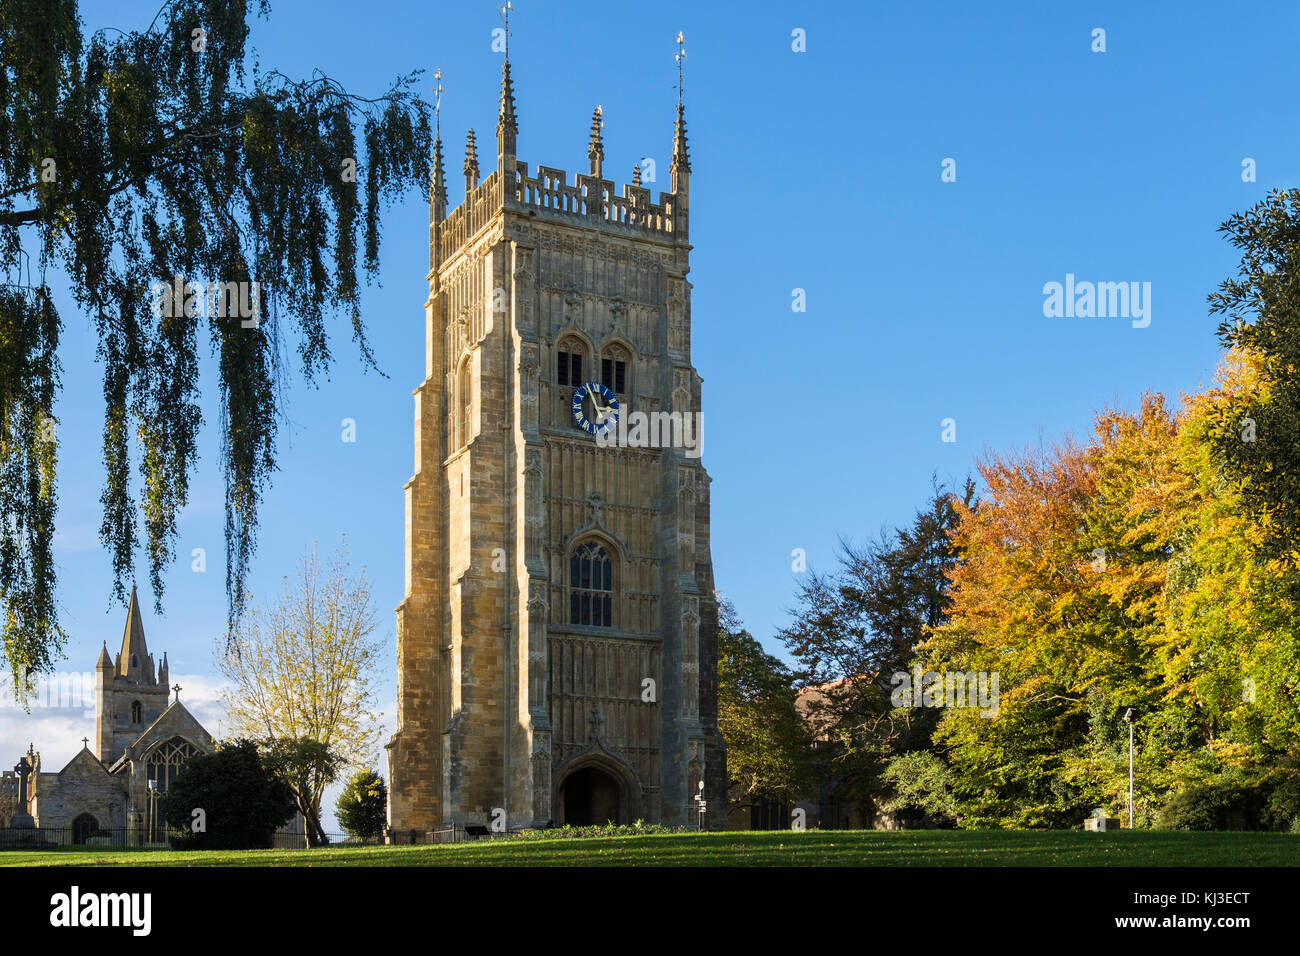 The old Abbey Bell Tower and St. Lawrence's church in Abbey Park in Cotswolds town. Evesham, Worcestershire, England, UK, Britain Stock Photo